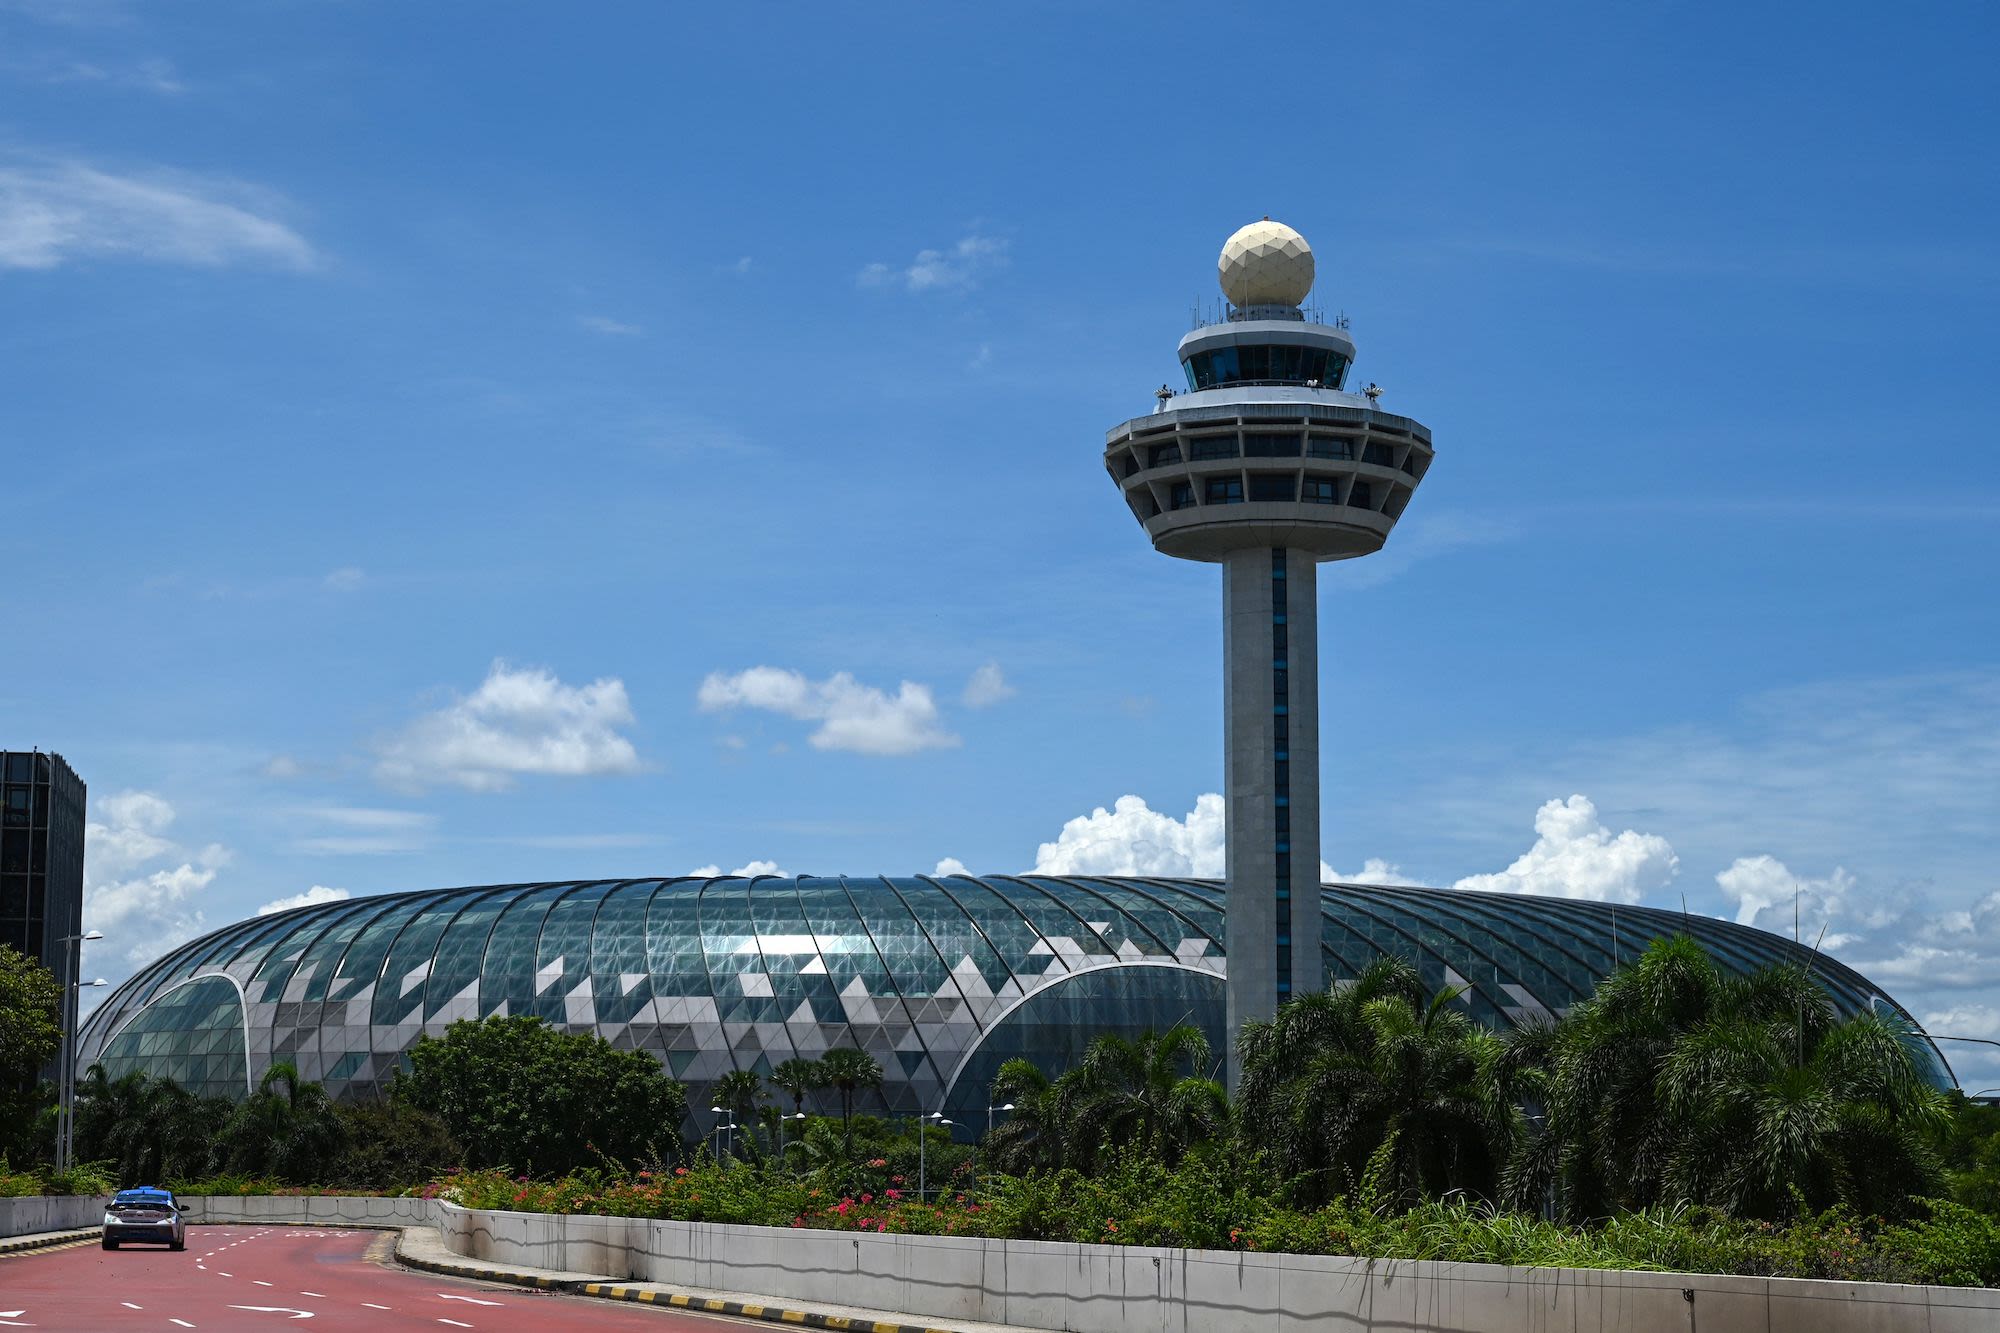 More automated systems, new dining options at Singapore's Changi Airport  Terminal 2 - CNA